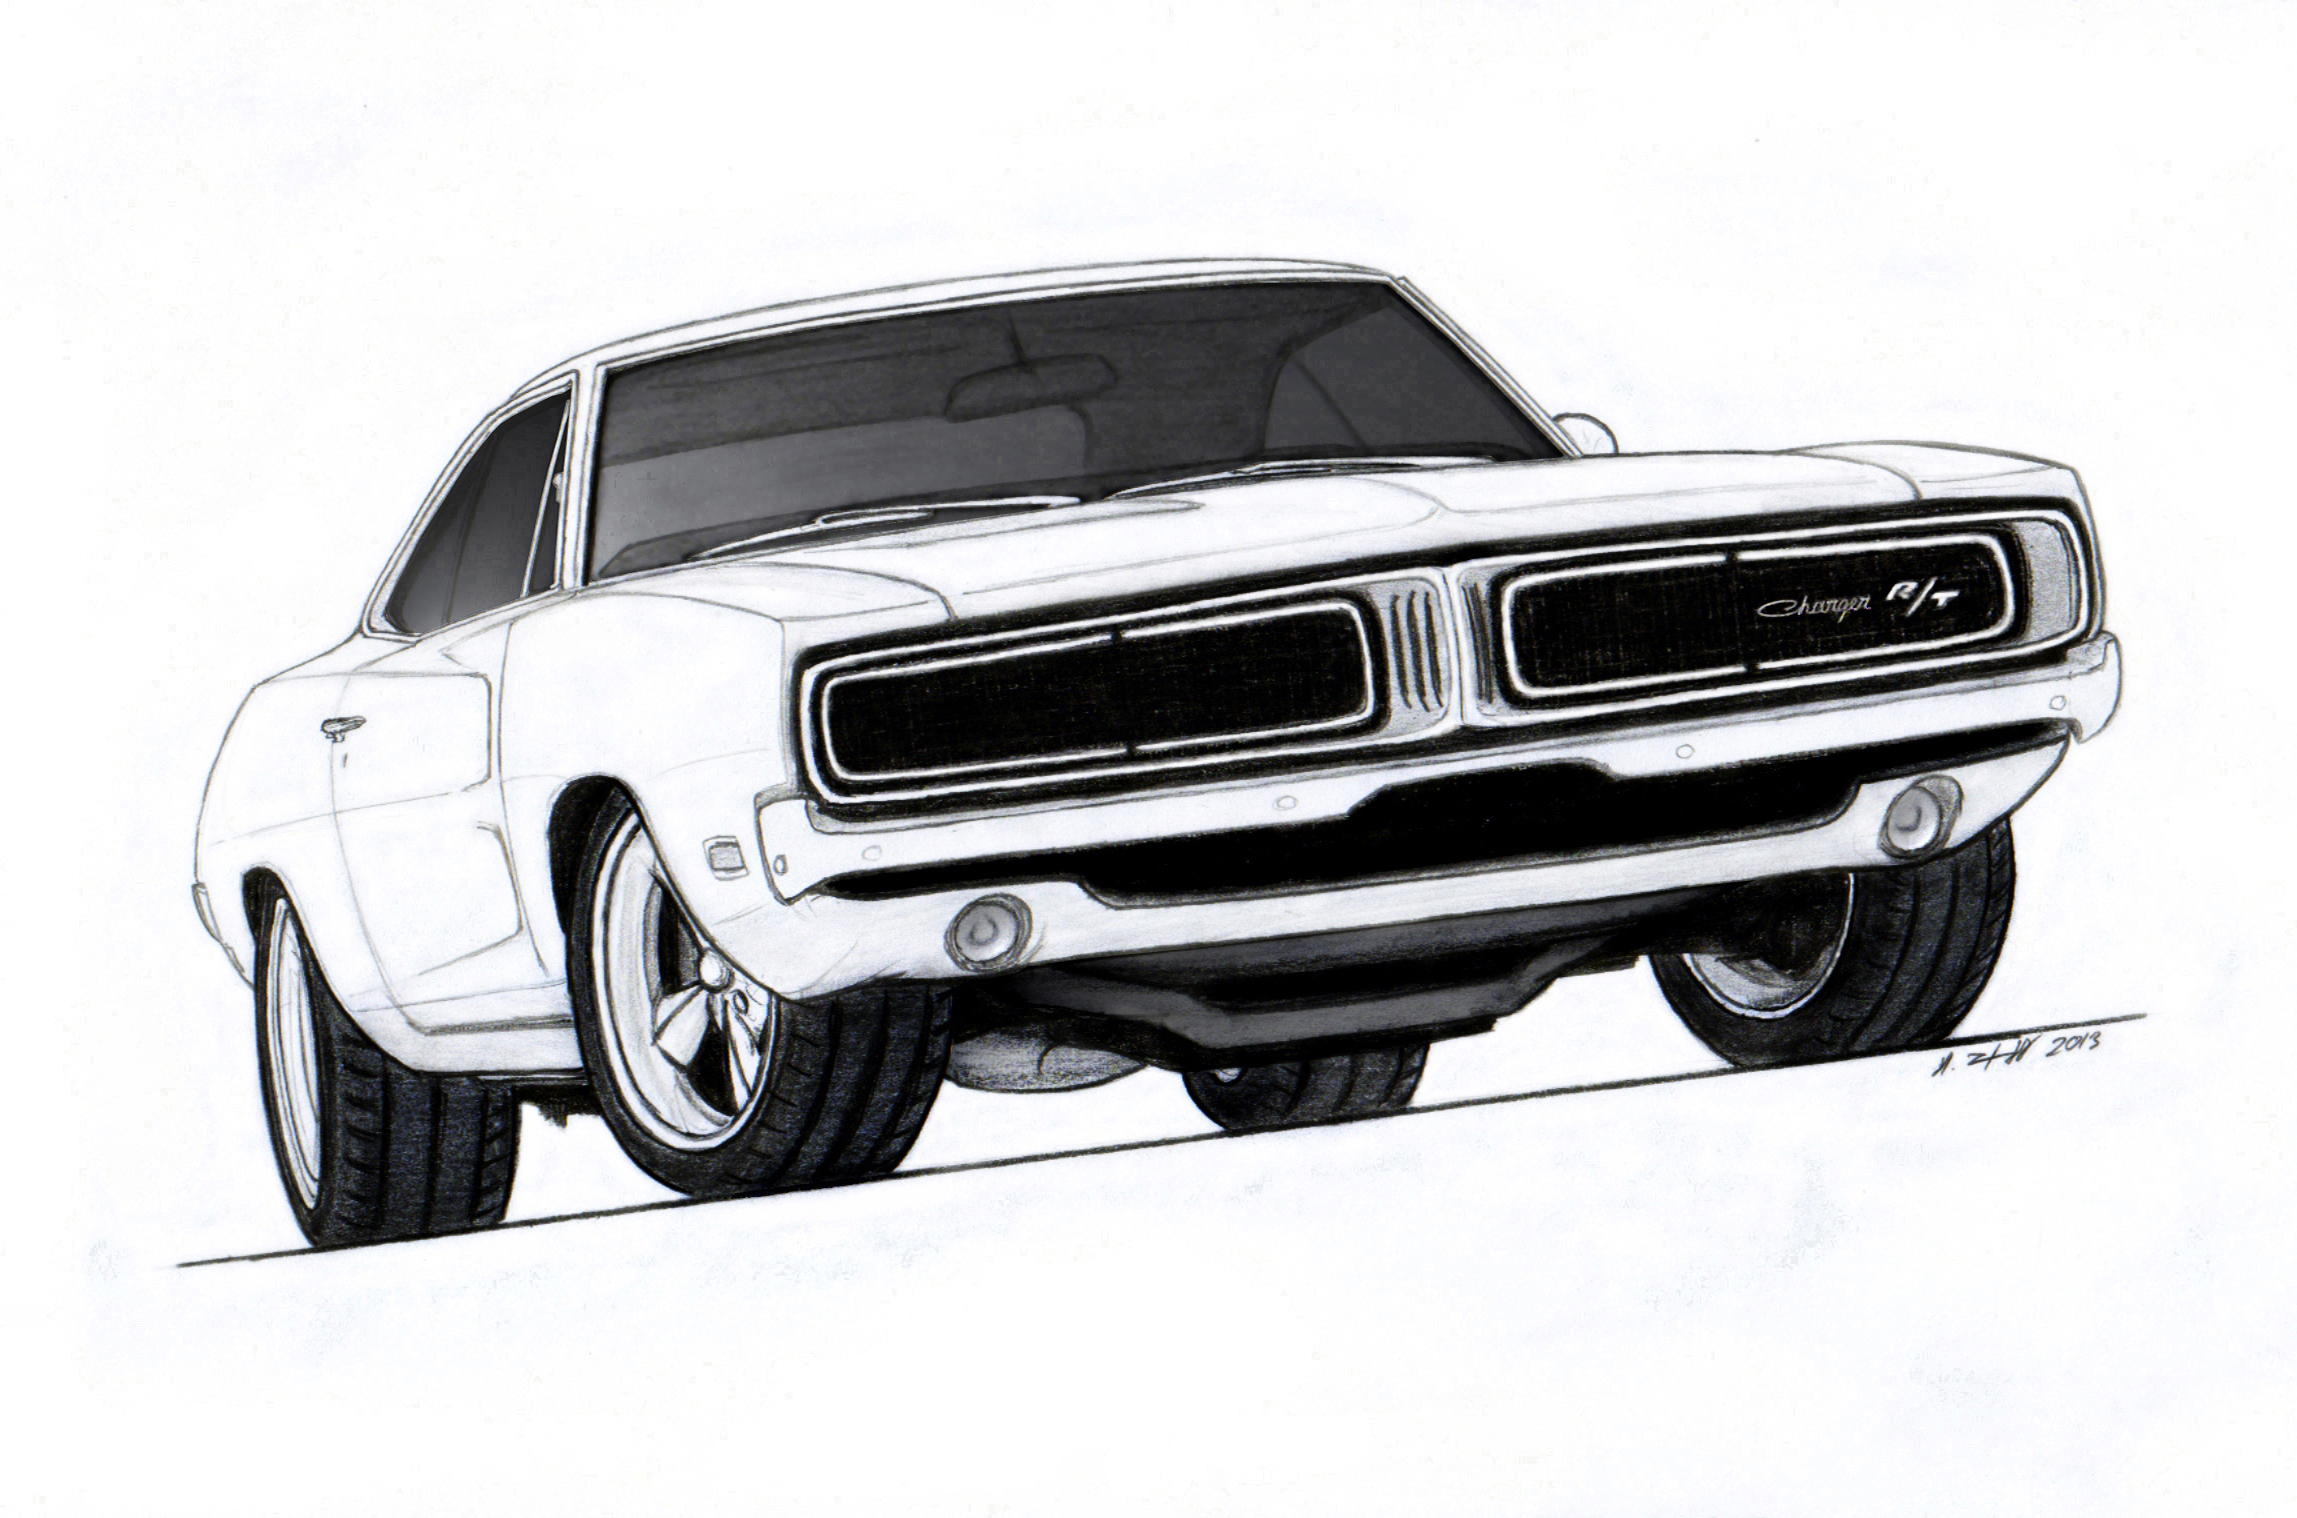 1969 Camaro Sketch at PaintingValley.com | Explore collection of 1969